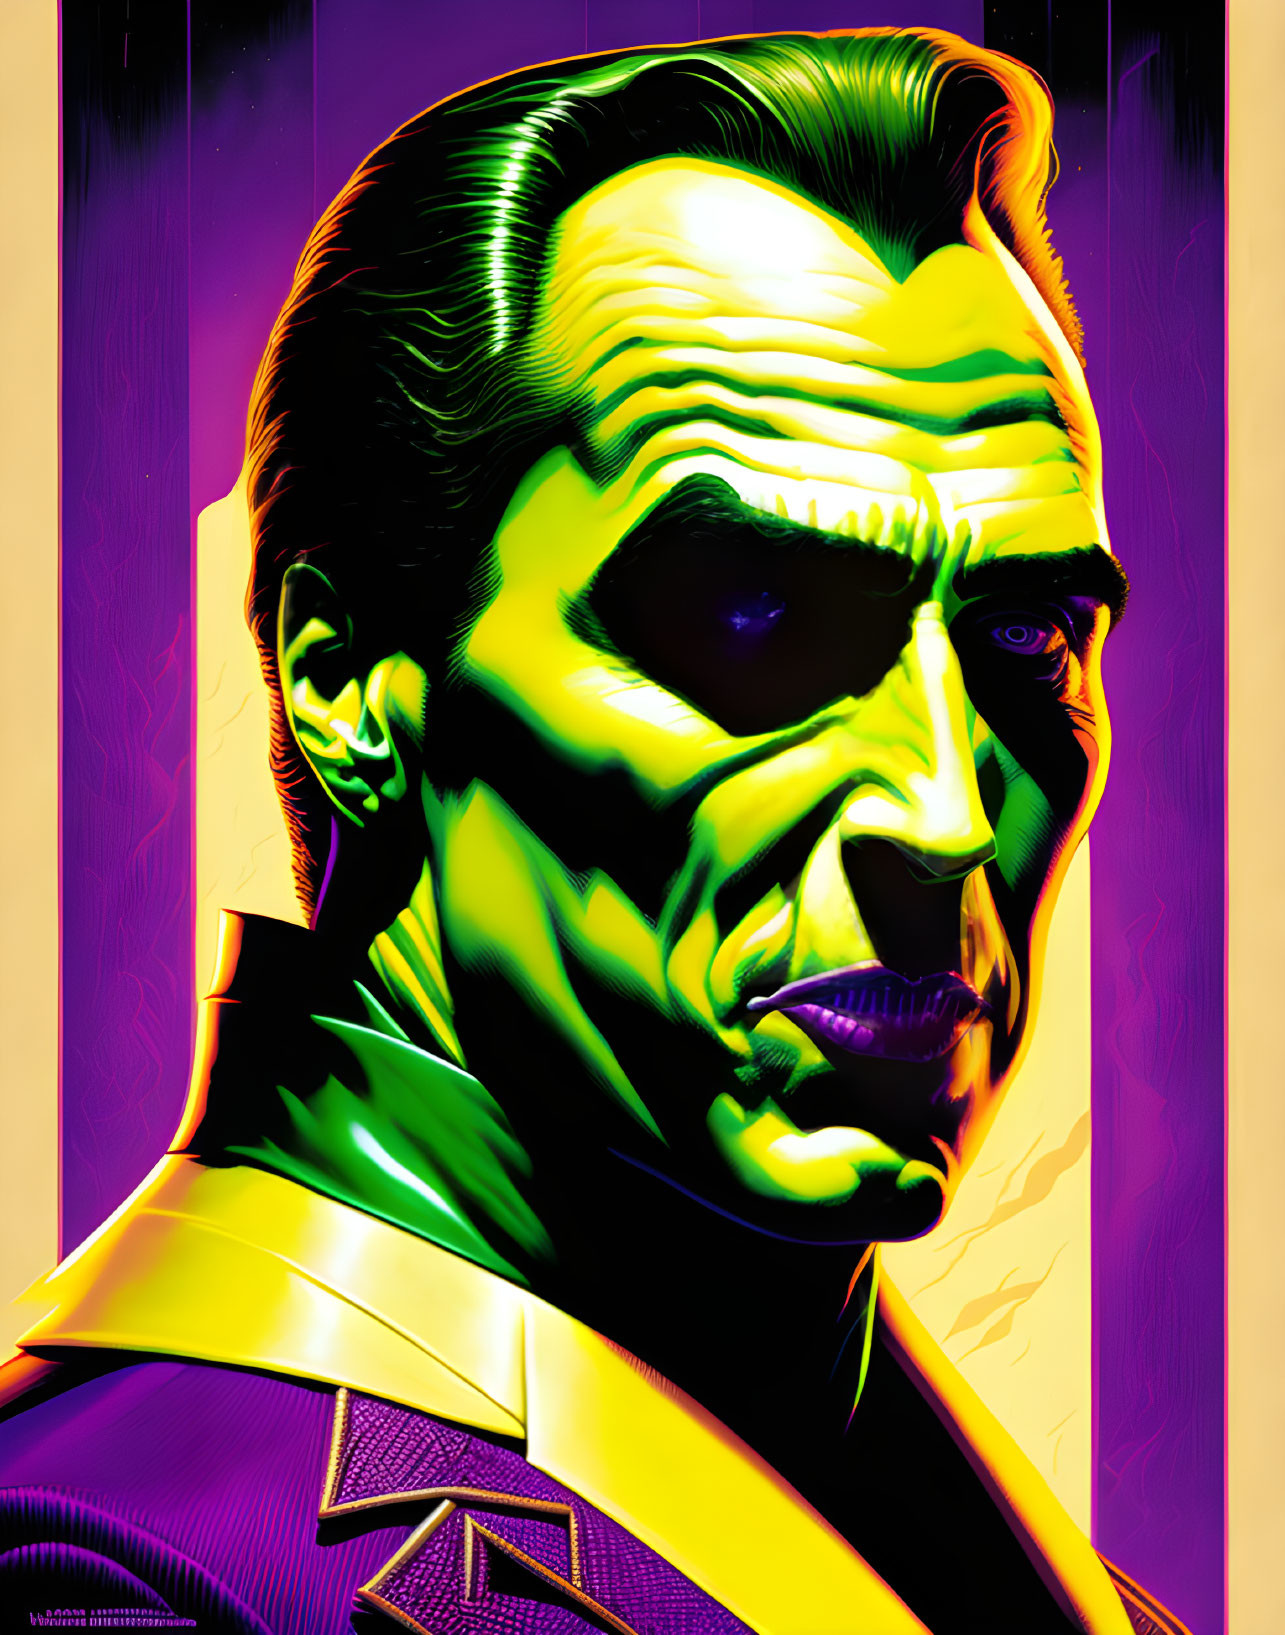 Colorful stylized male portrait with exaggerated contrasts in purple, yellow, and green.